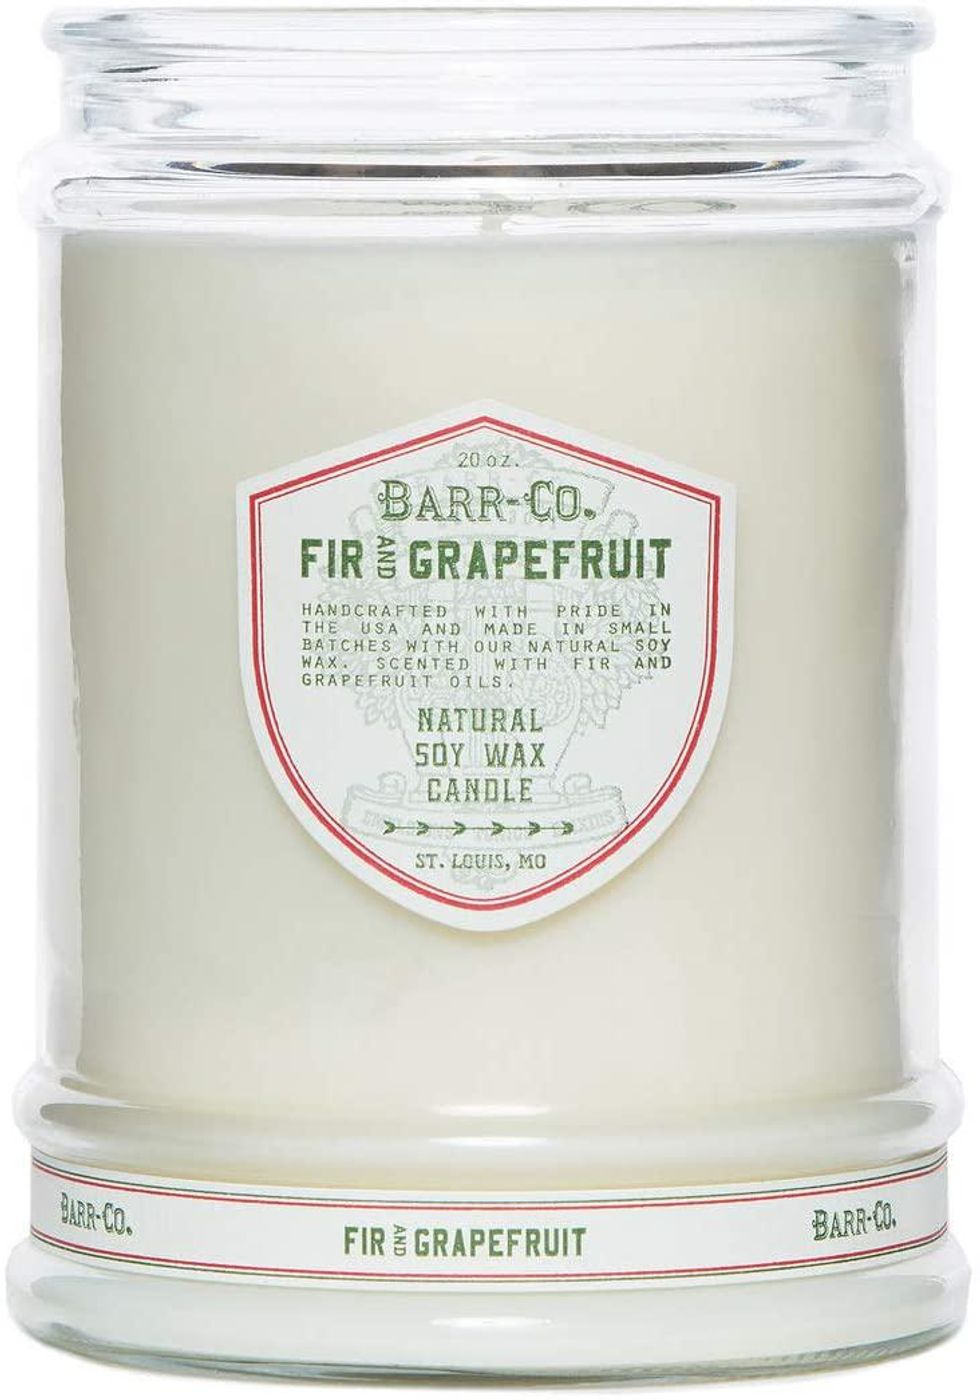 Barr Co Fir and Grapefruit Candle